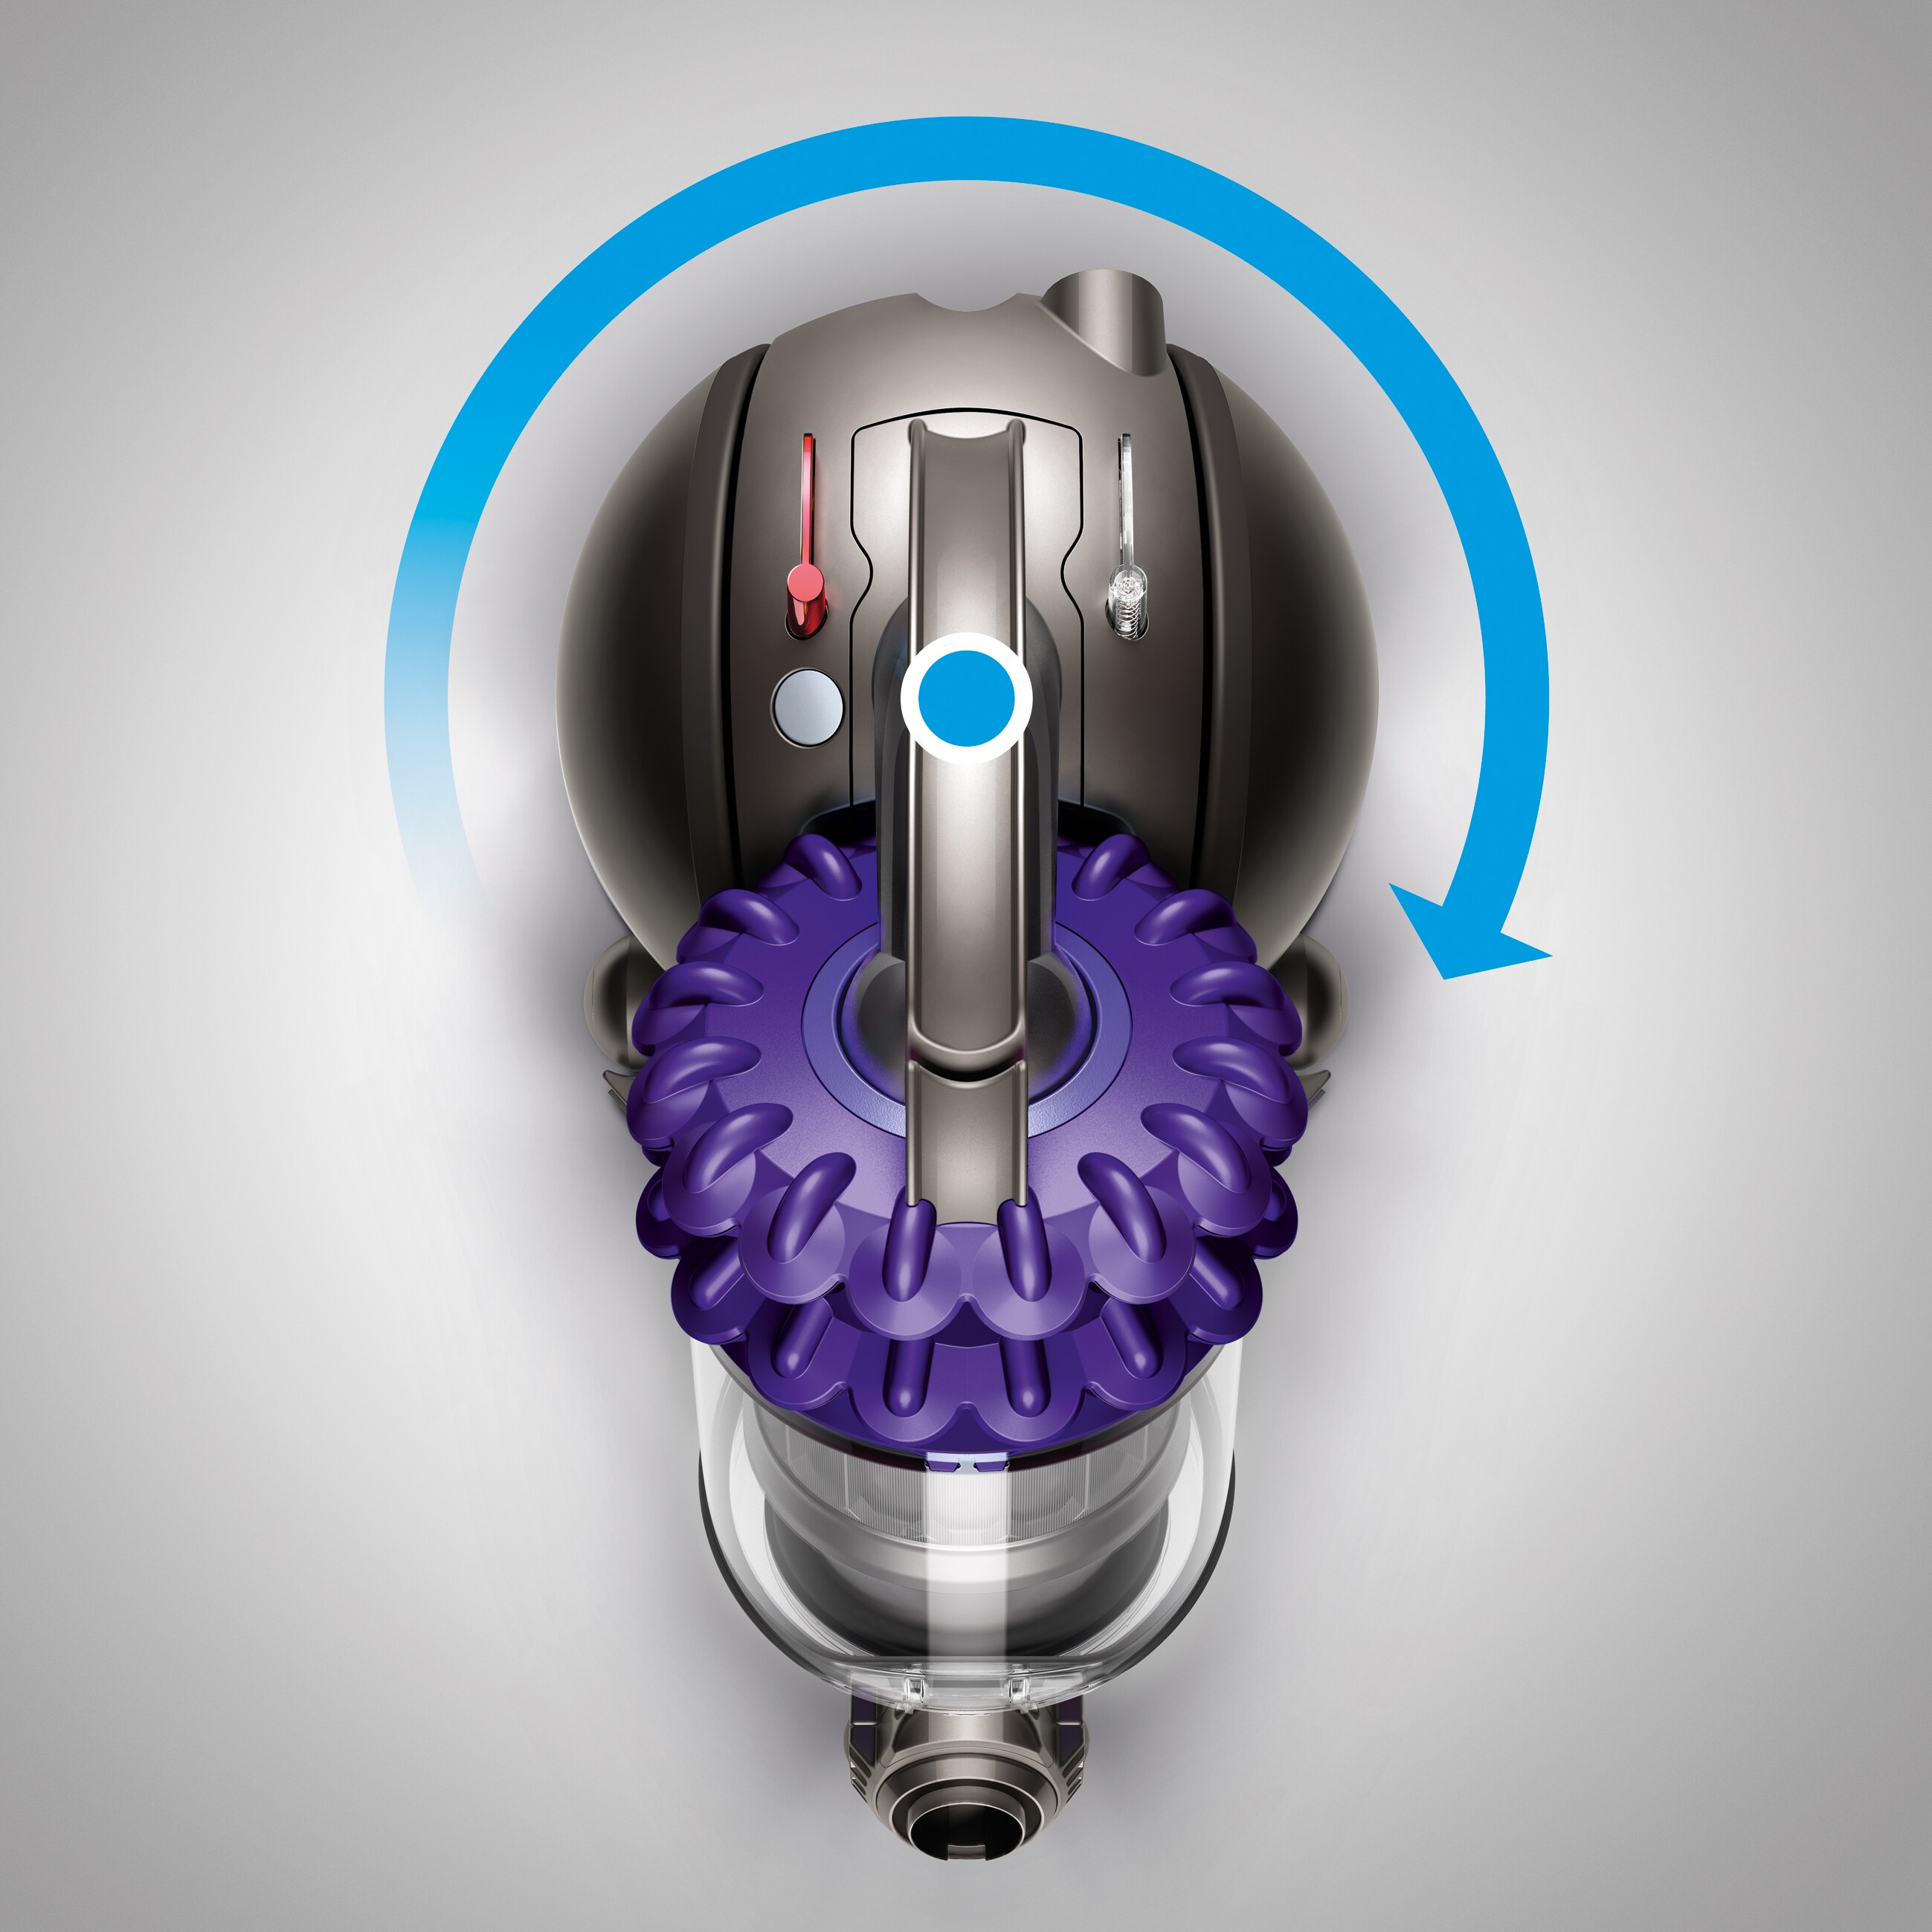 Dyson DC47 Animal Ball Compact Canister Vacuum in the Canister 